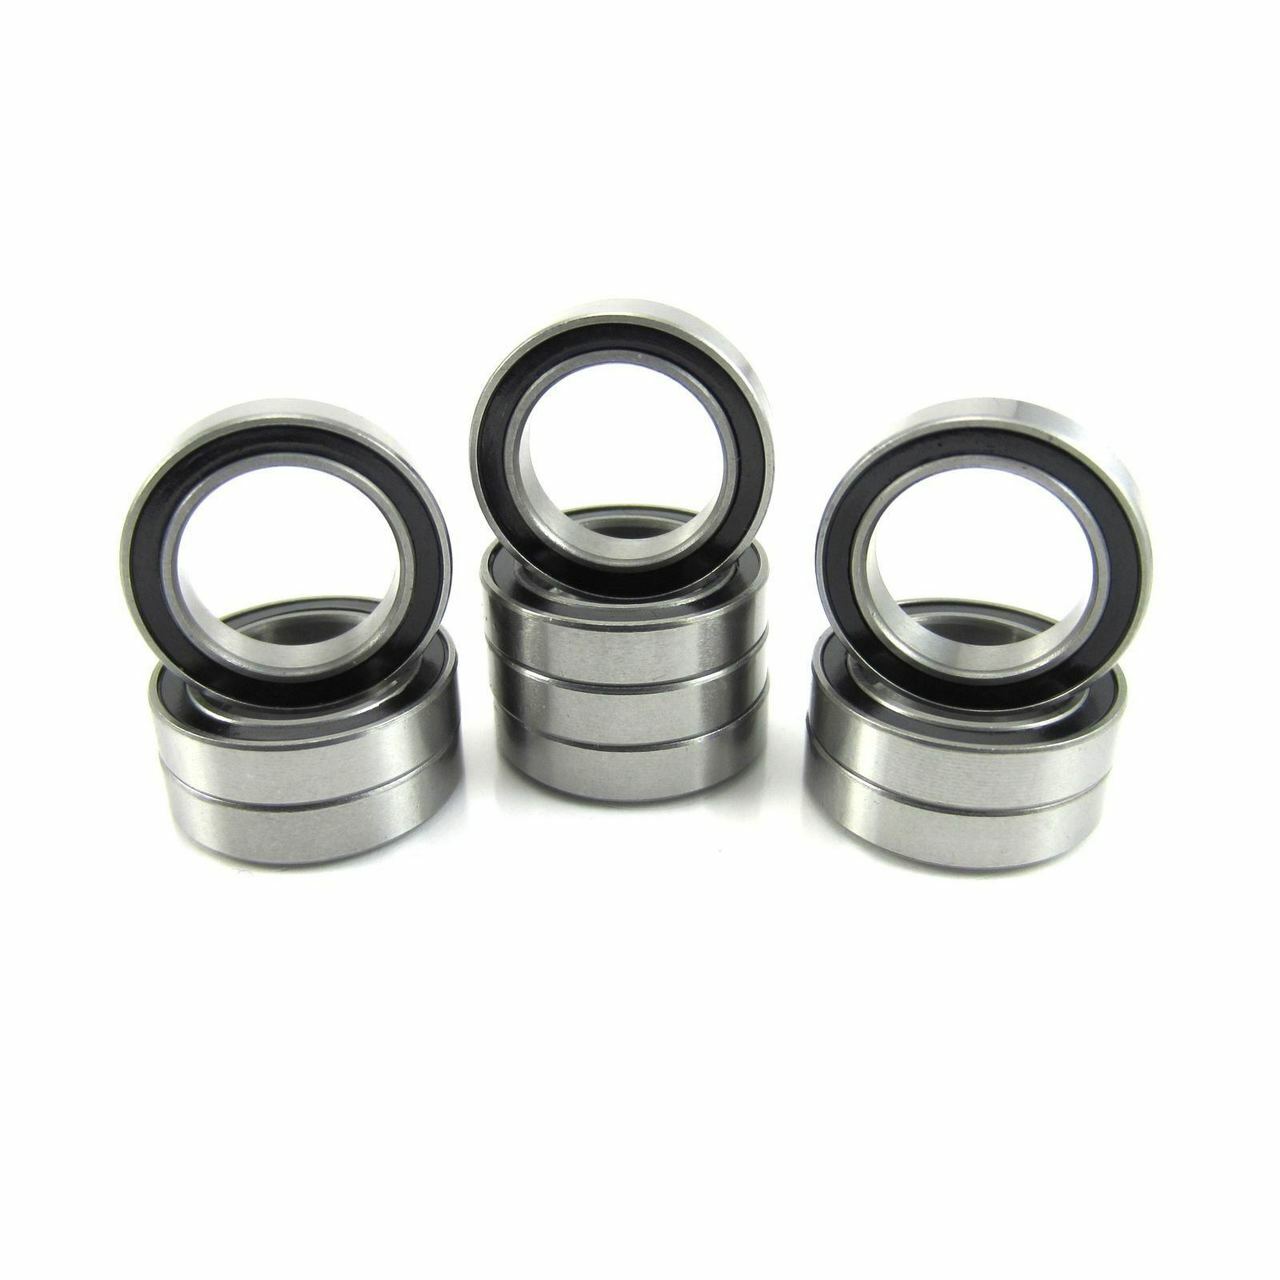 S6701-2RS 12x18x4mm Precision High Speed RC Car Ball Bearing, 440C Stainless Steel with Black Rubber Seals ABEC-1 ABEC-3 ABEC-5